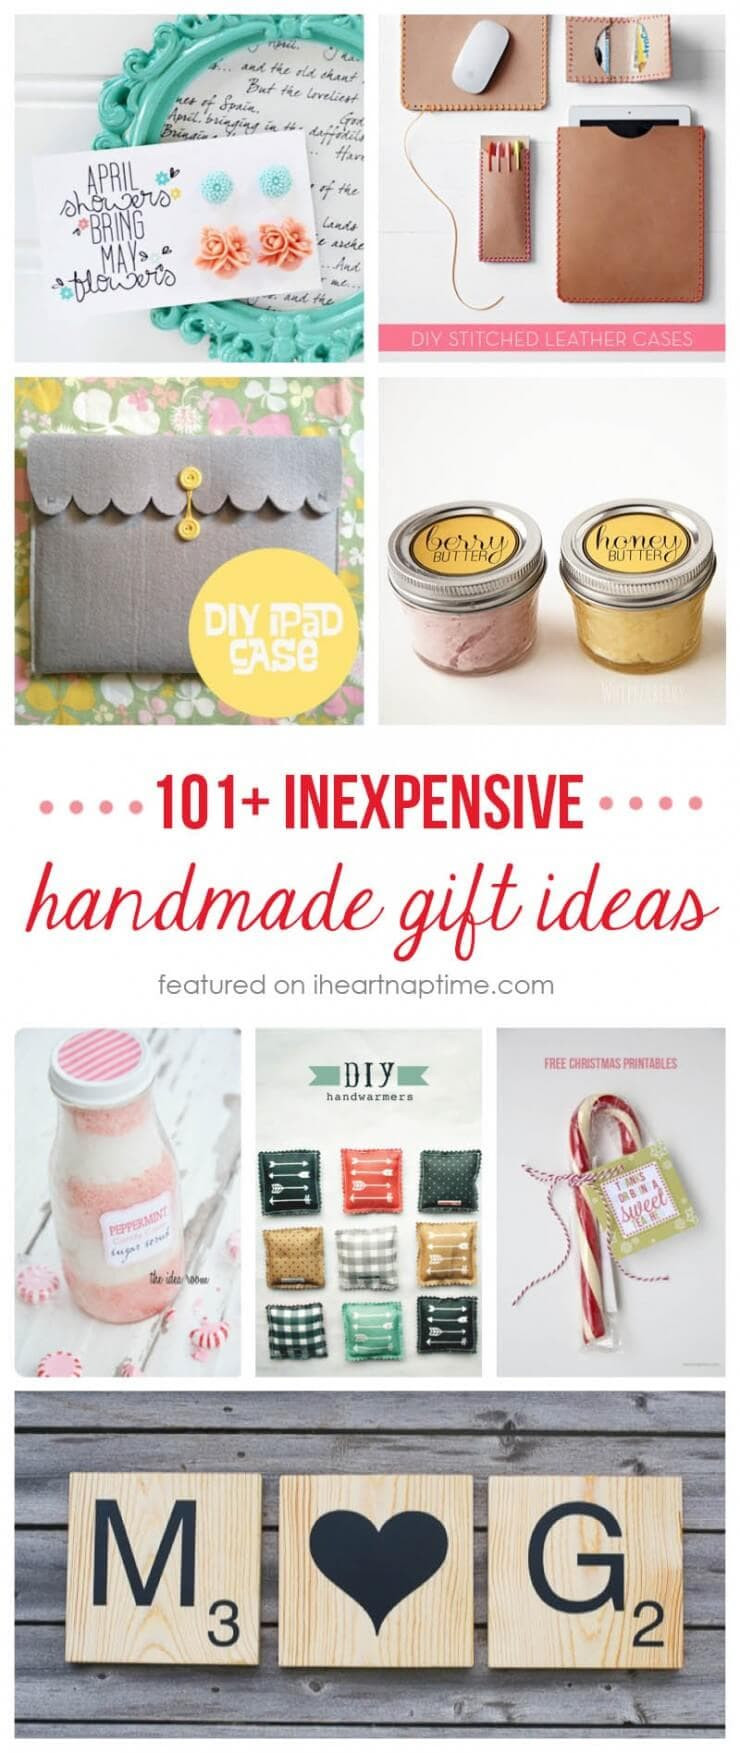 DIY Gifts For Christmas
 50 homemade t ideas to make for under $5 I Heart Nap Time